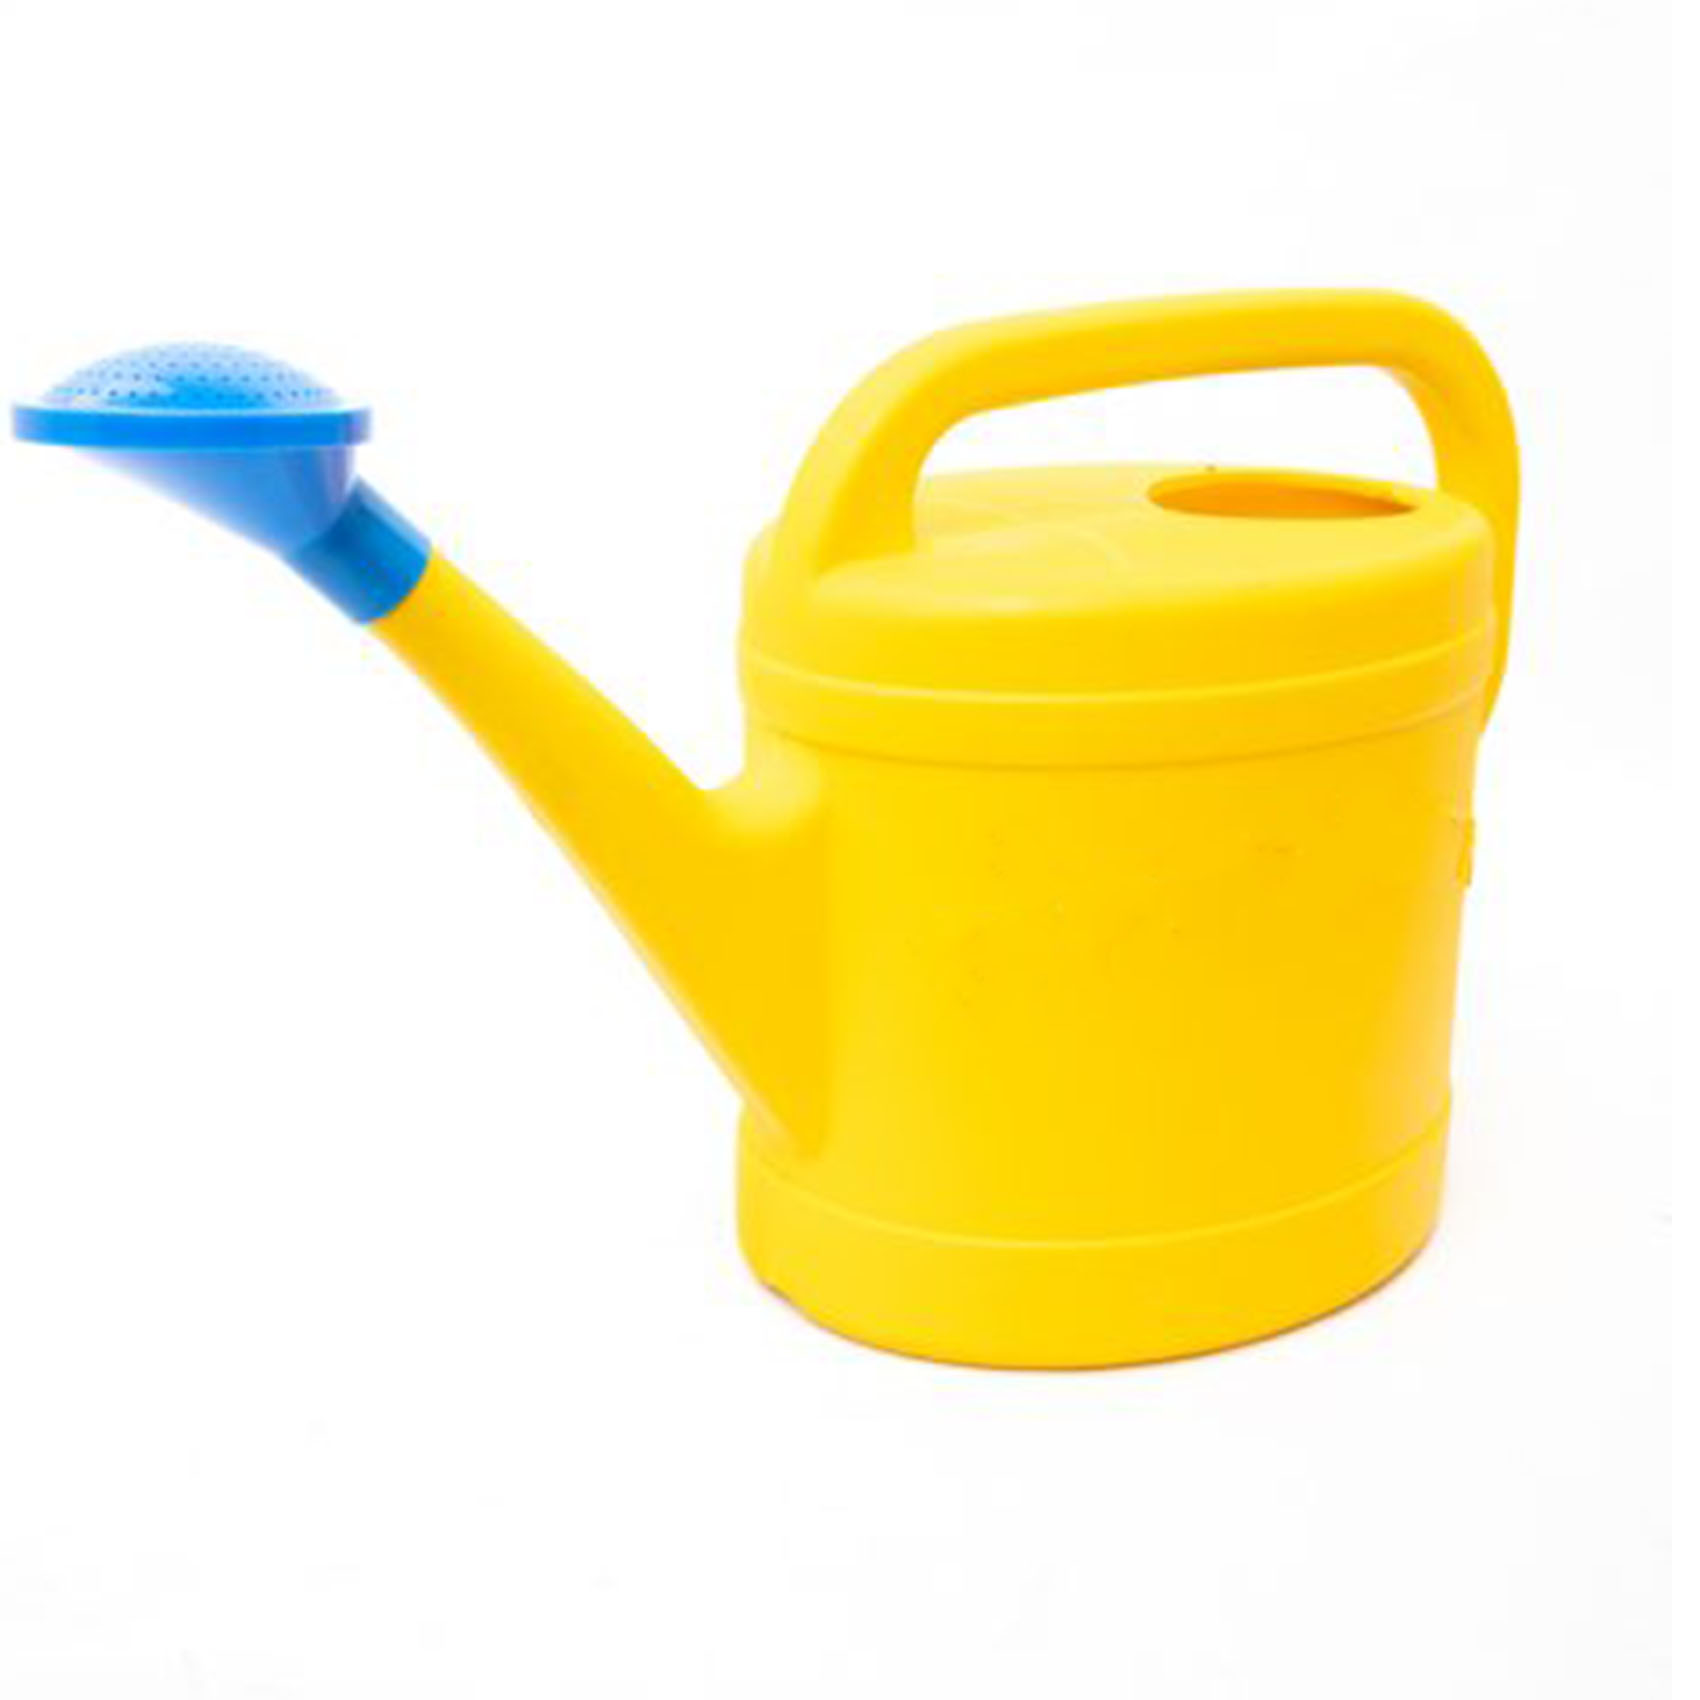 STAR WATERING JERRY CAN 12LTR